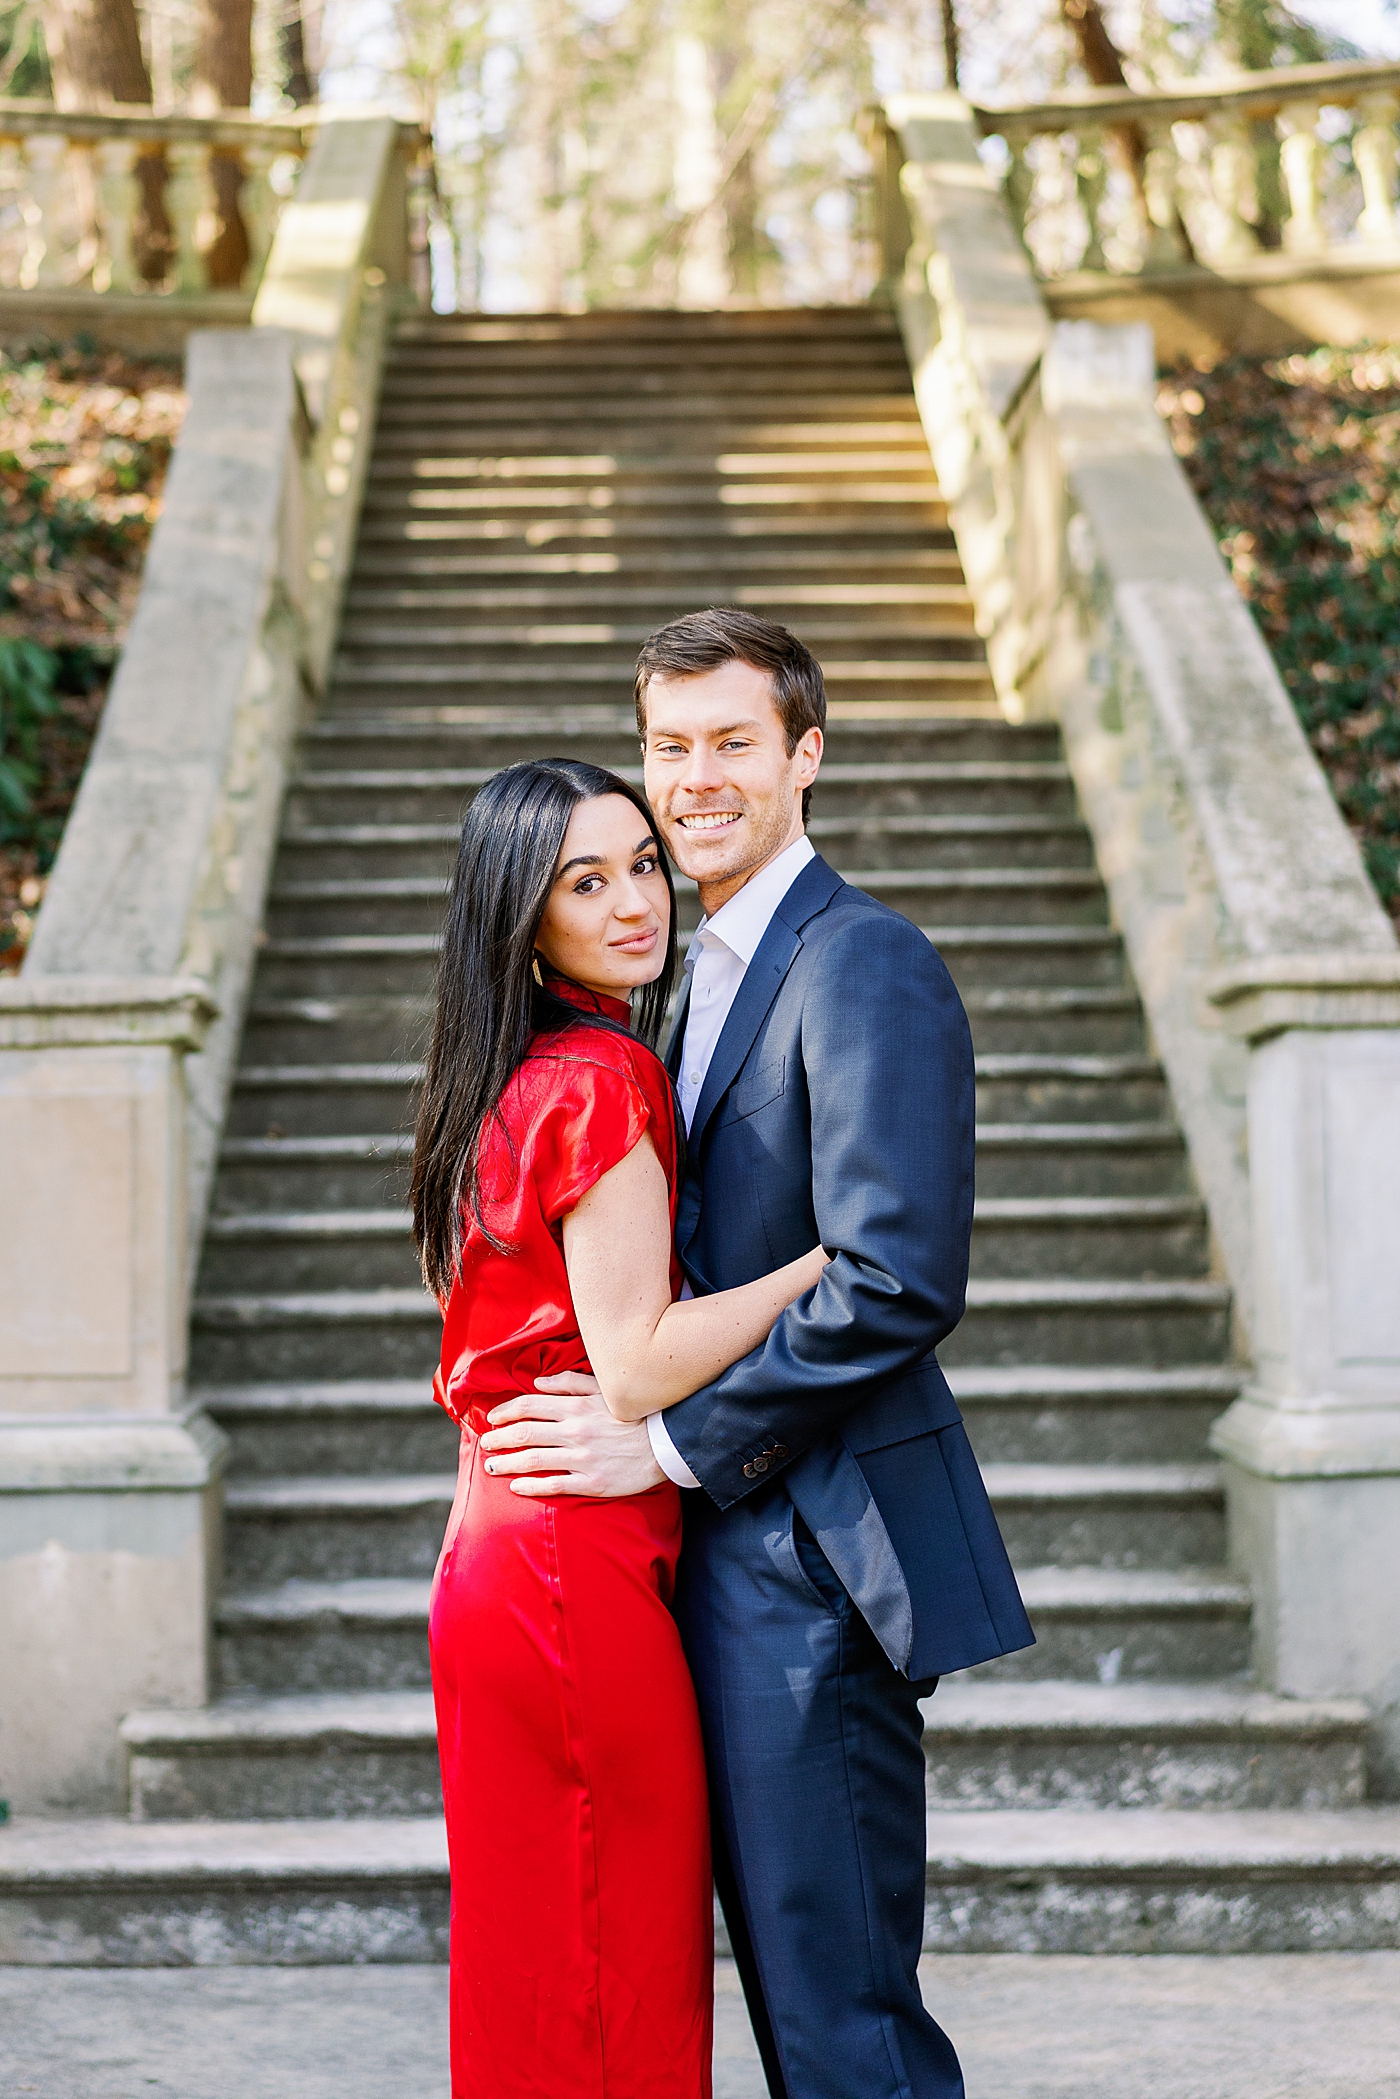 Couple in red and blue posing in front of stairs | Image by Annie Laura Photo